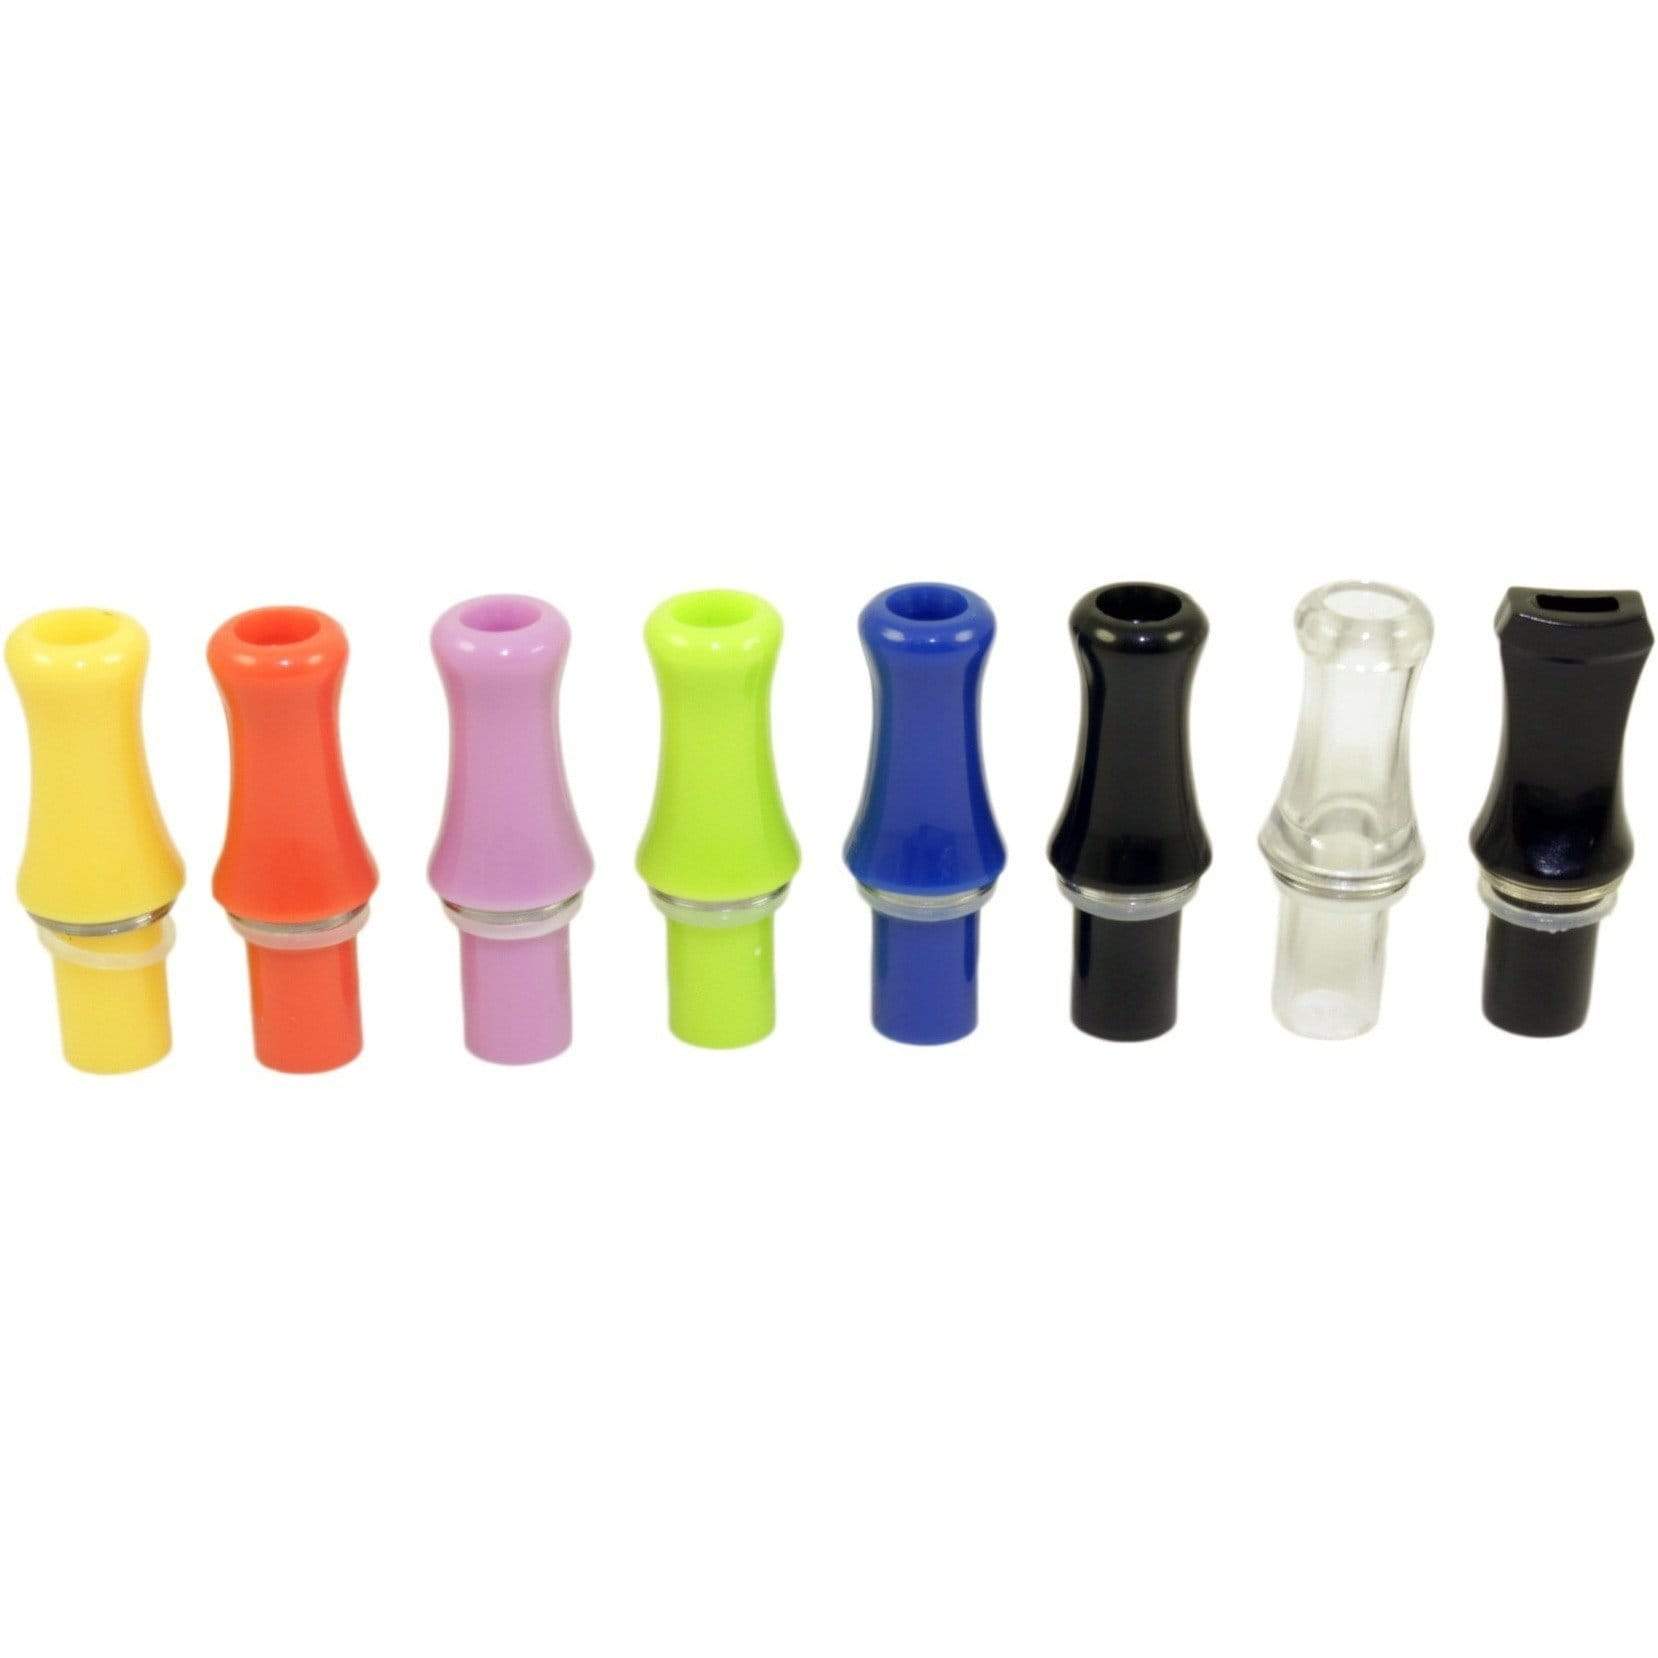 CE5 Mouth Pieces Black Drip Tips